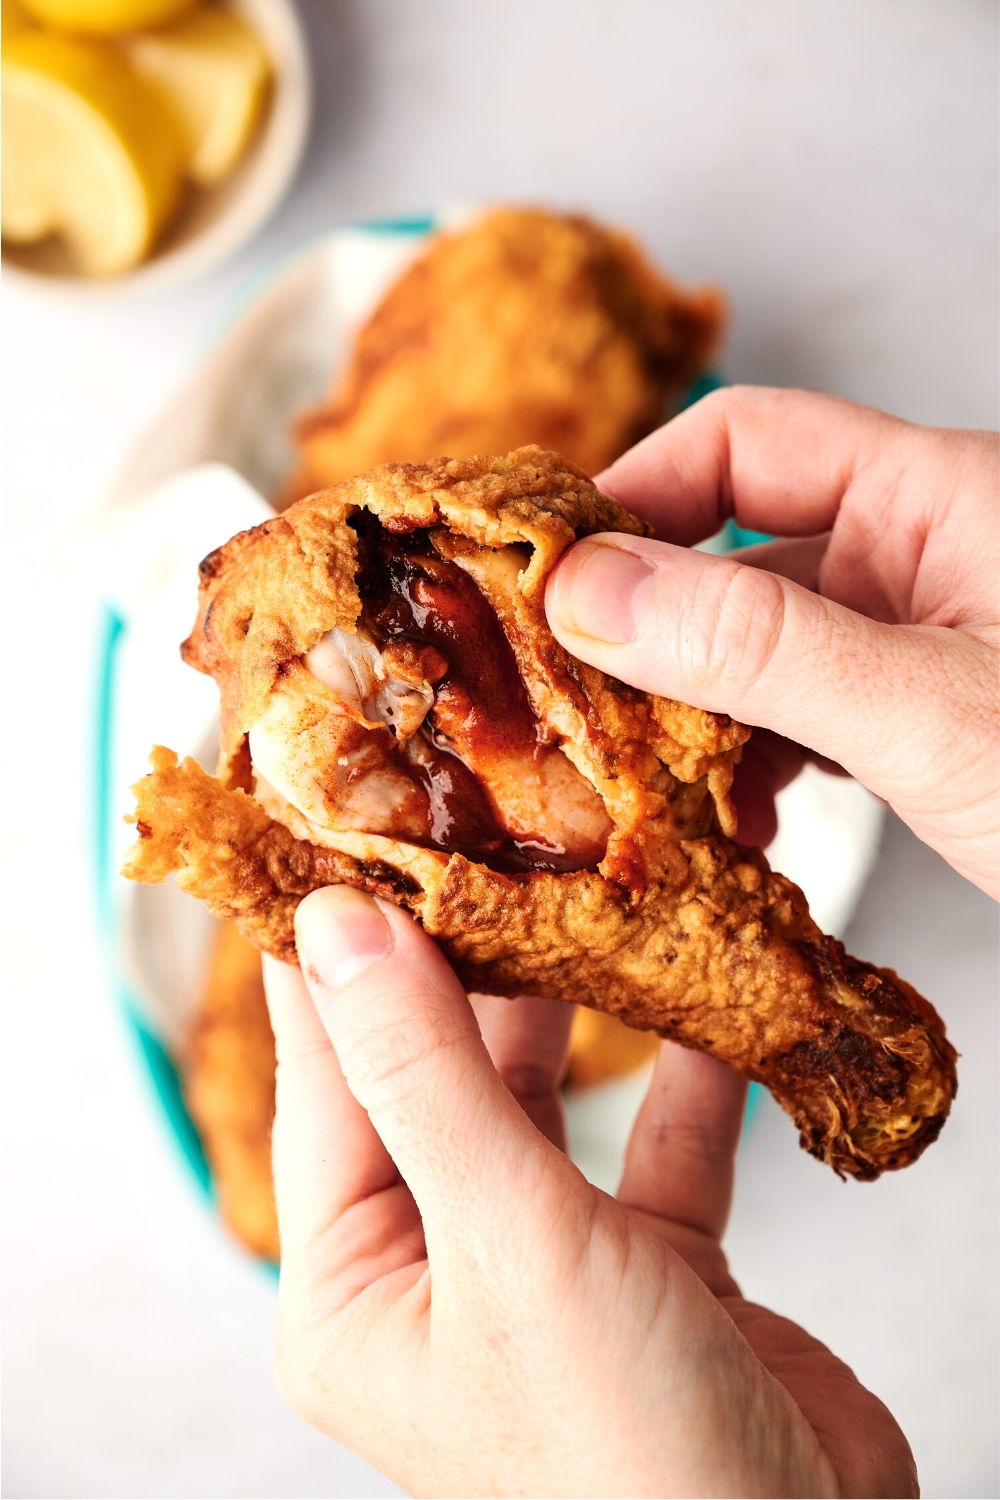 A hand pulling apart a piece o fried chicken showing the inside with a sauce.